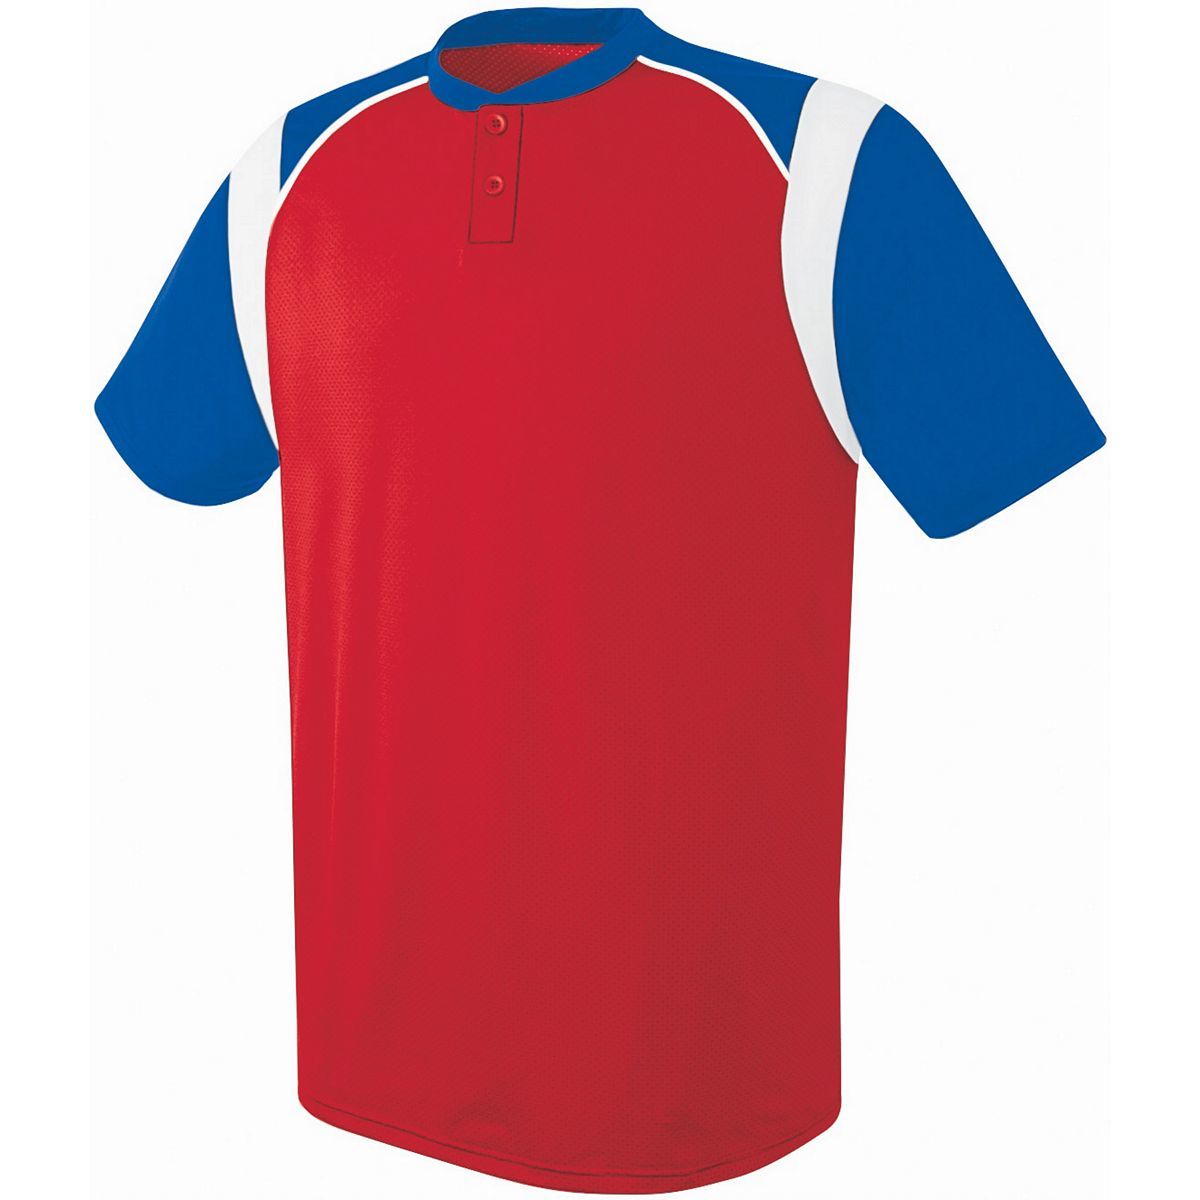 Augusta Sportswear Youth Wildcard Two-Button Jersey in Scarlet/Royal/White  -Part of the Youth, Youth-Jersey, Augusta-Products, Baseball, Shirts, All-Sports, All-Sports-1 product lines at KanaleyCreations.com